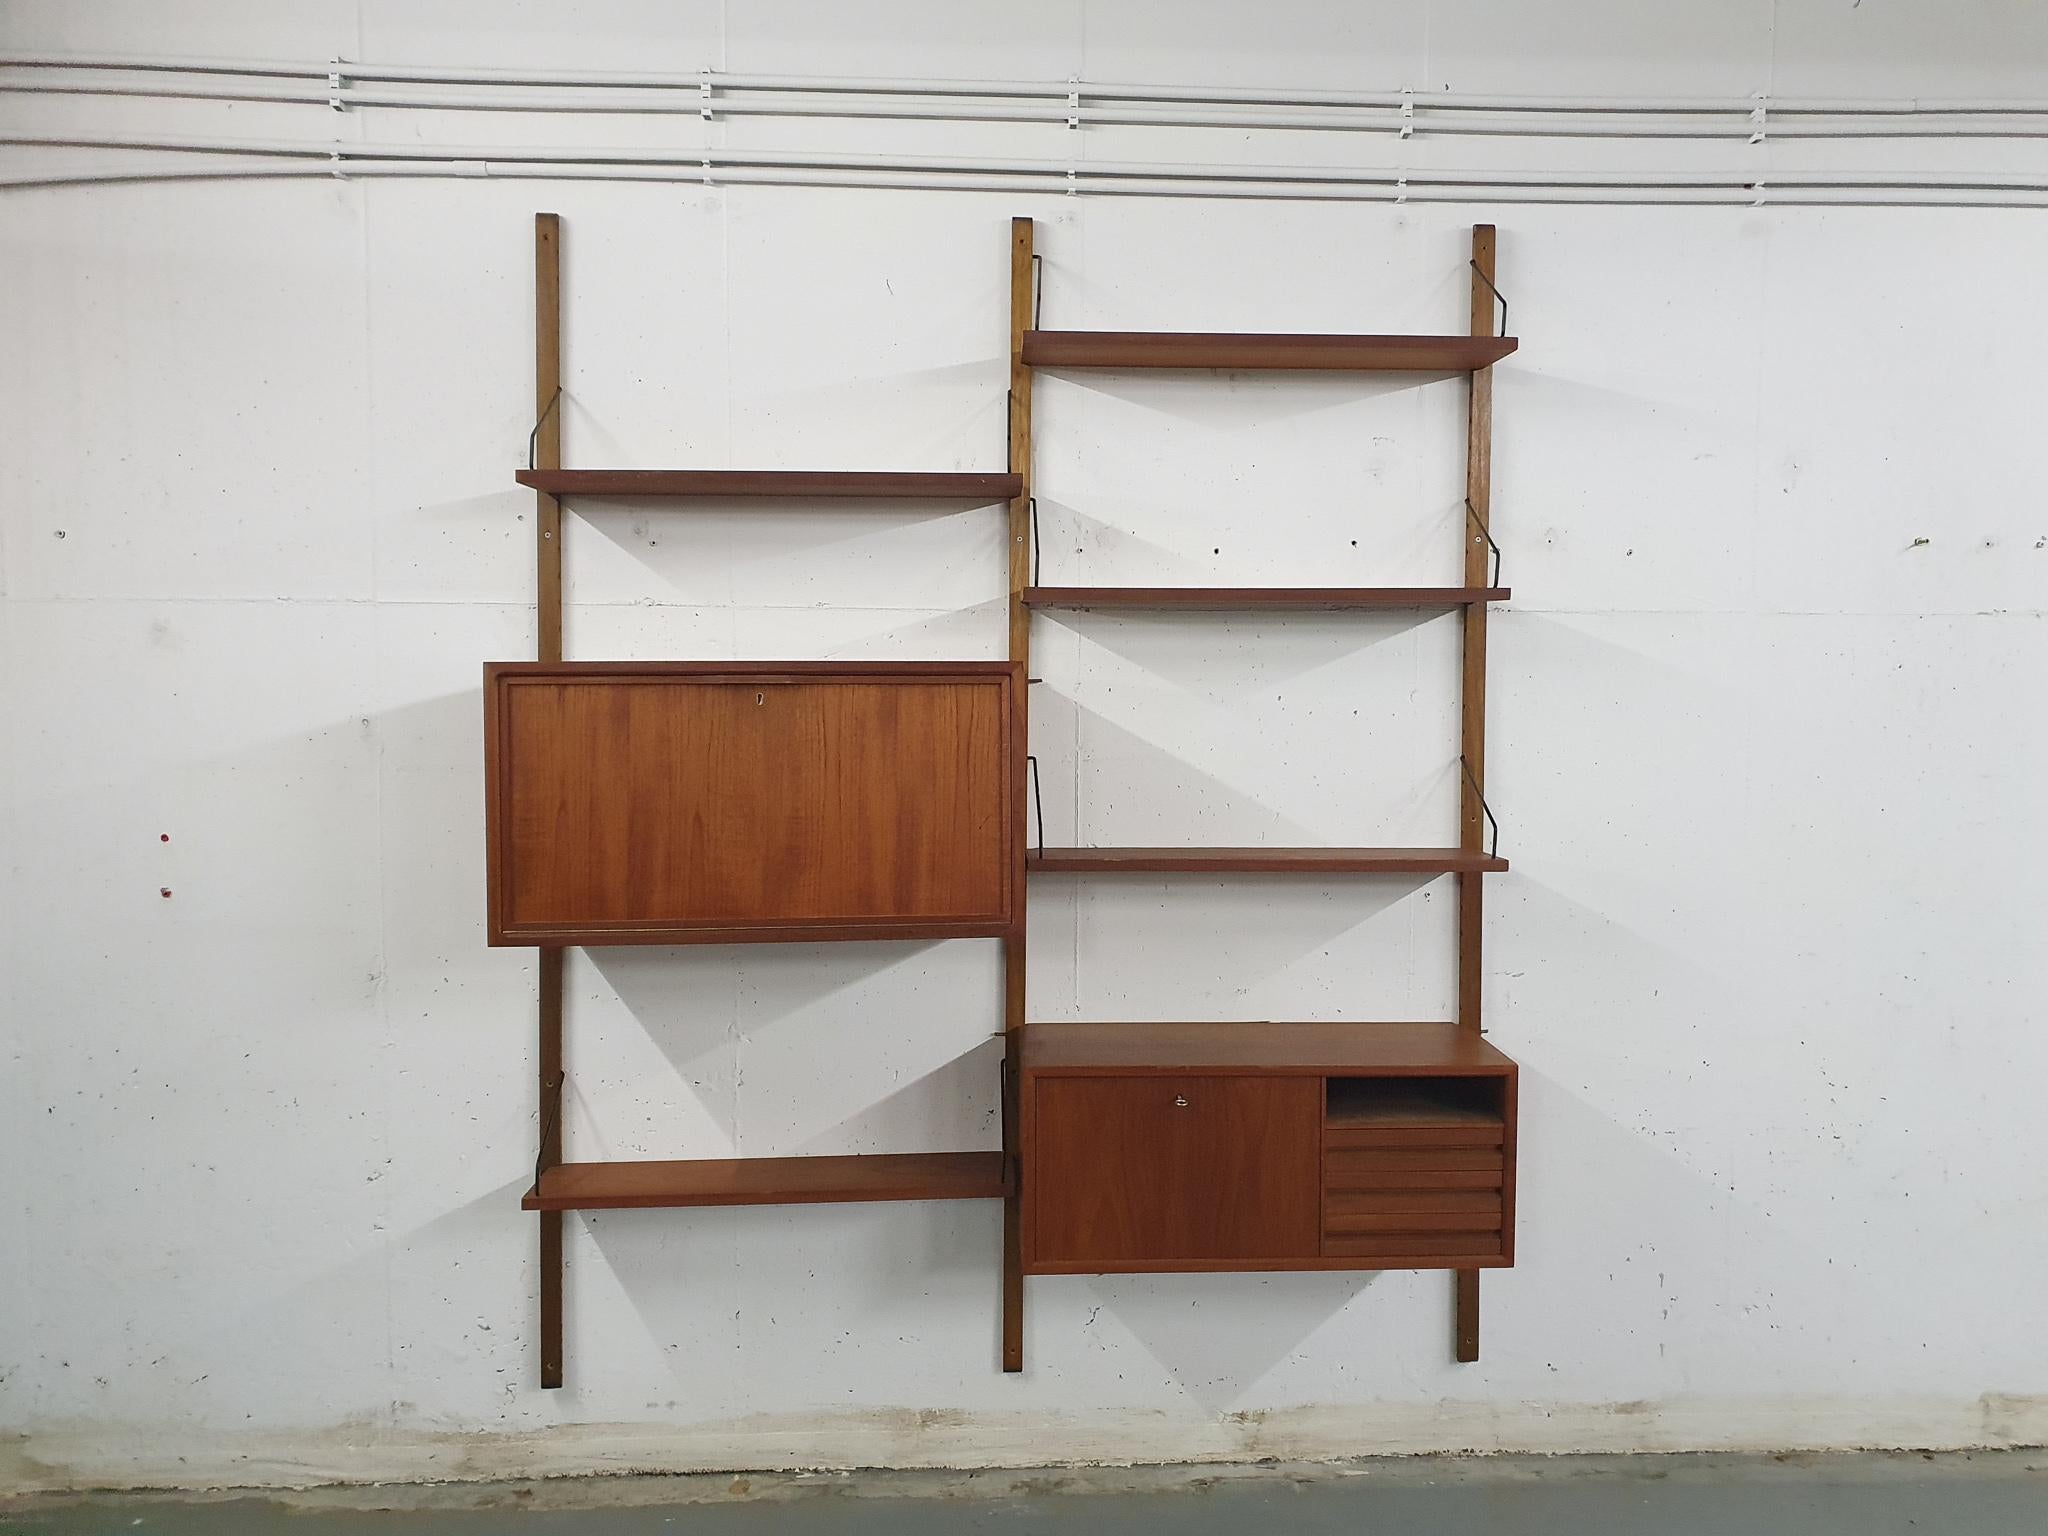 Wooden risers and teak veneer book shelves and cabinet with black metal hooks.

This wall unit consist of:
5 x shelf: 80 x 20 cm
1 x cabinet: 80 x 30 x 34cm (LxDxH)
1 x cabinet: 80 x 37.5 x 43cm (LxDxH)
3 x risers: 200 cm
